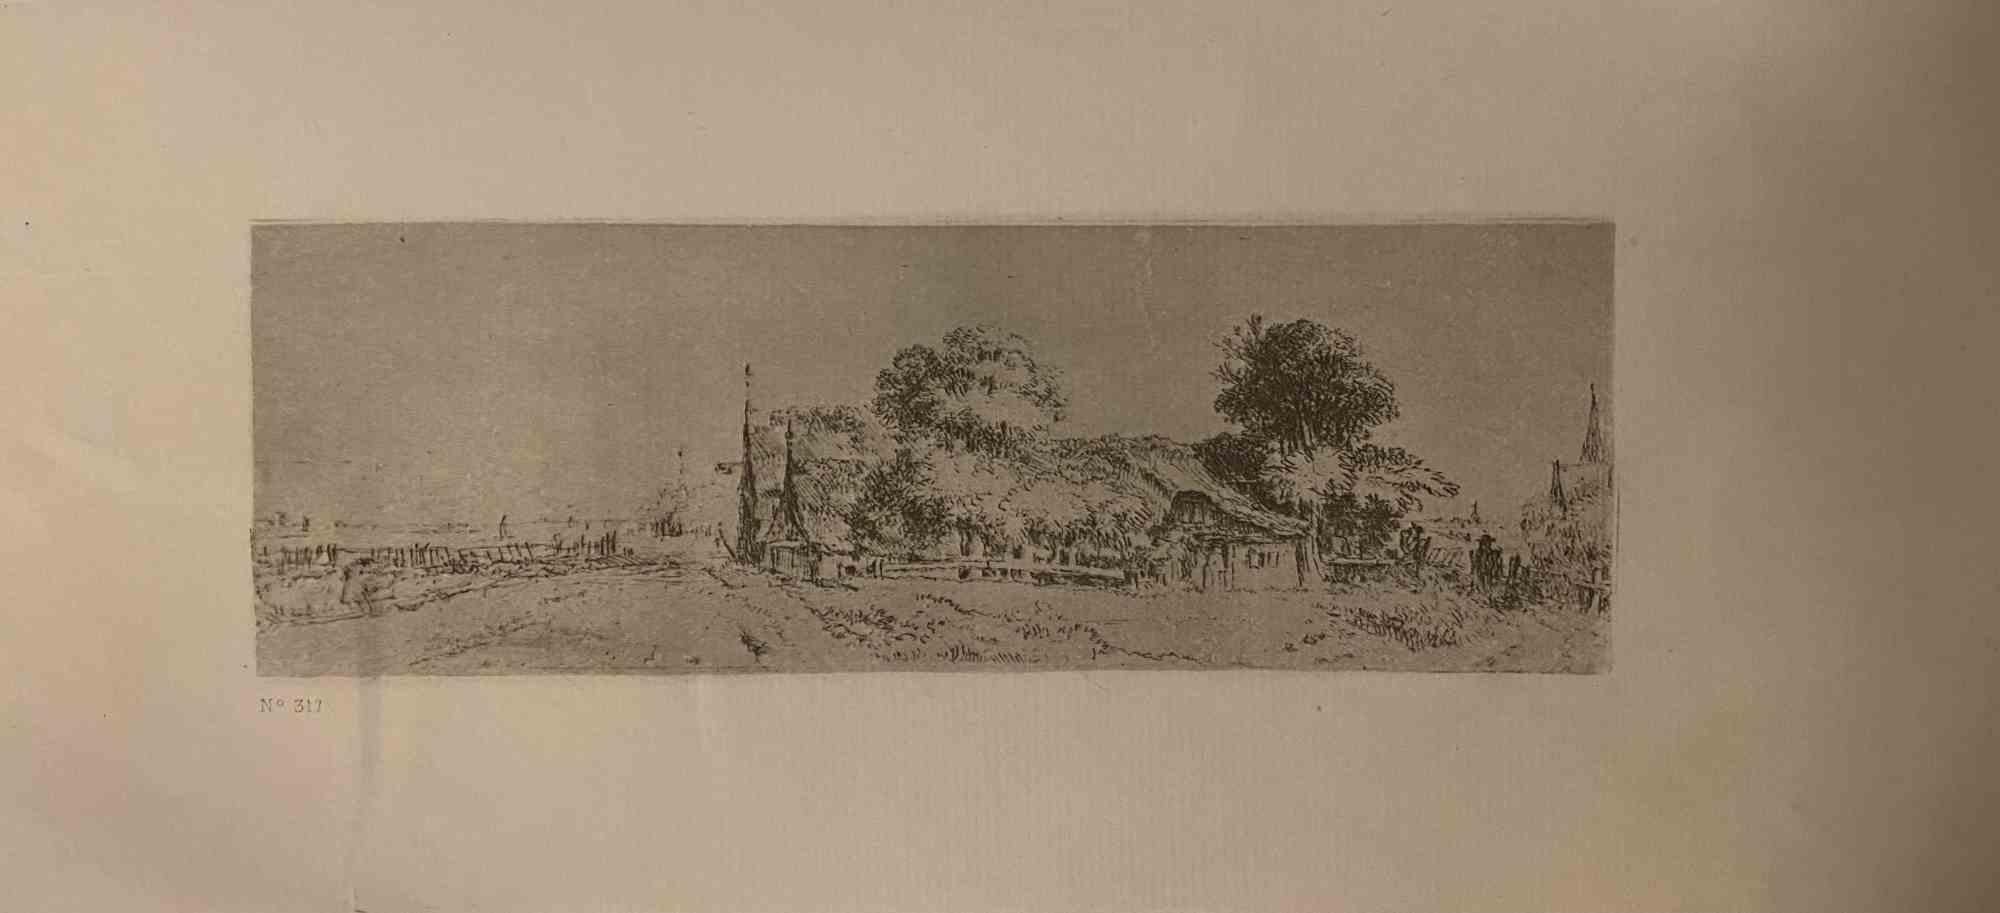 Charles Amand Durand Figurative Print - Landscape - Etching after Rembrandt - 19th Century